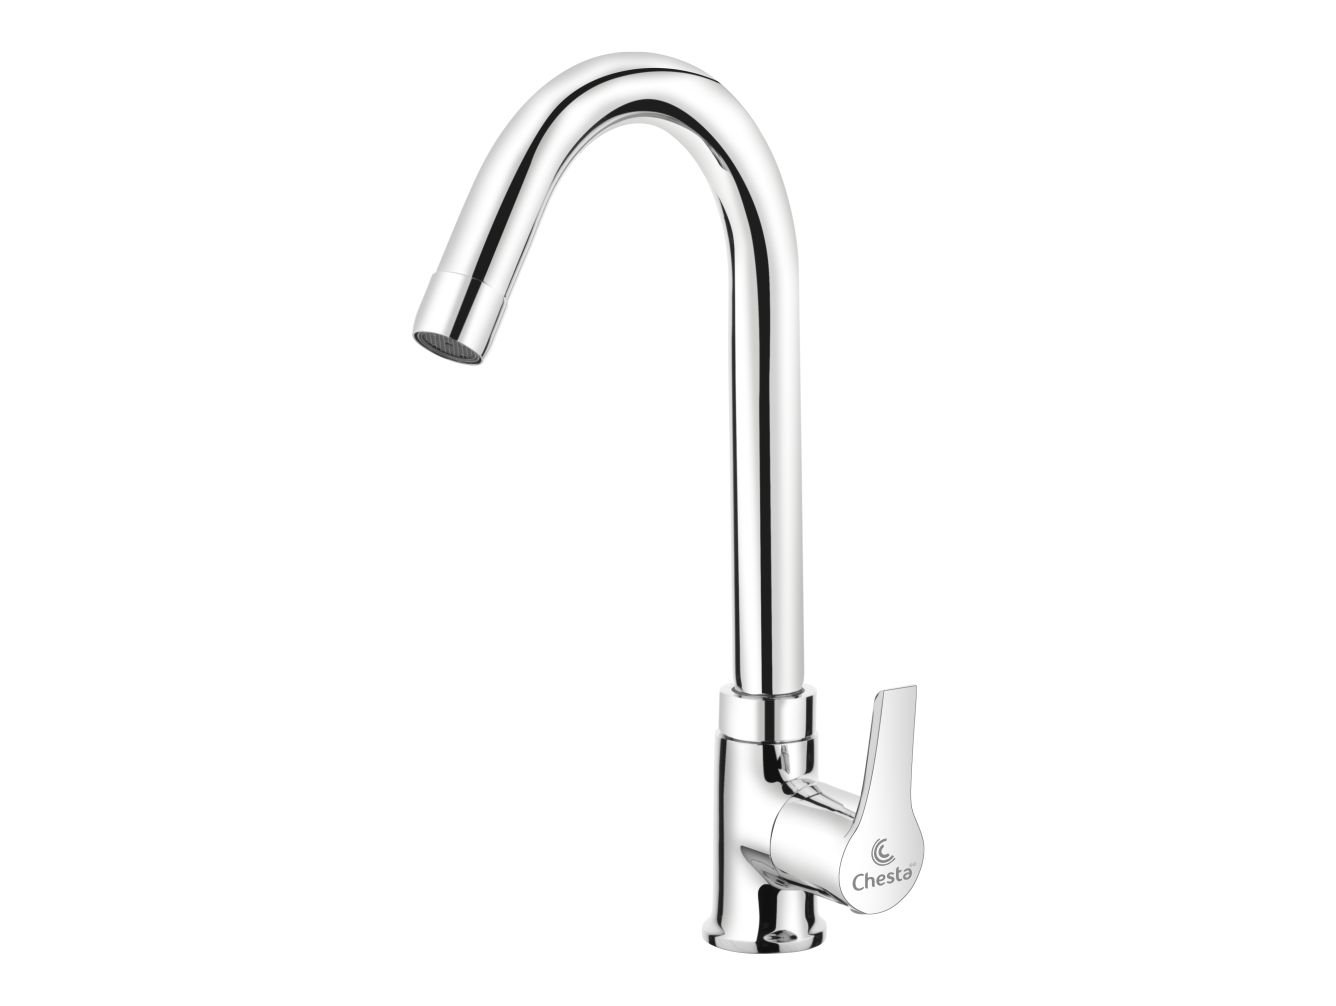 Swan Neck faucets by Chesta Bath Fittings